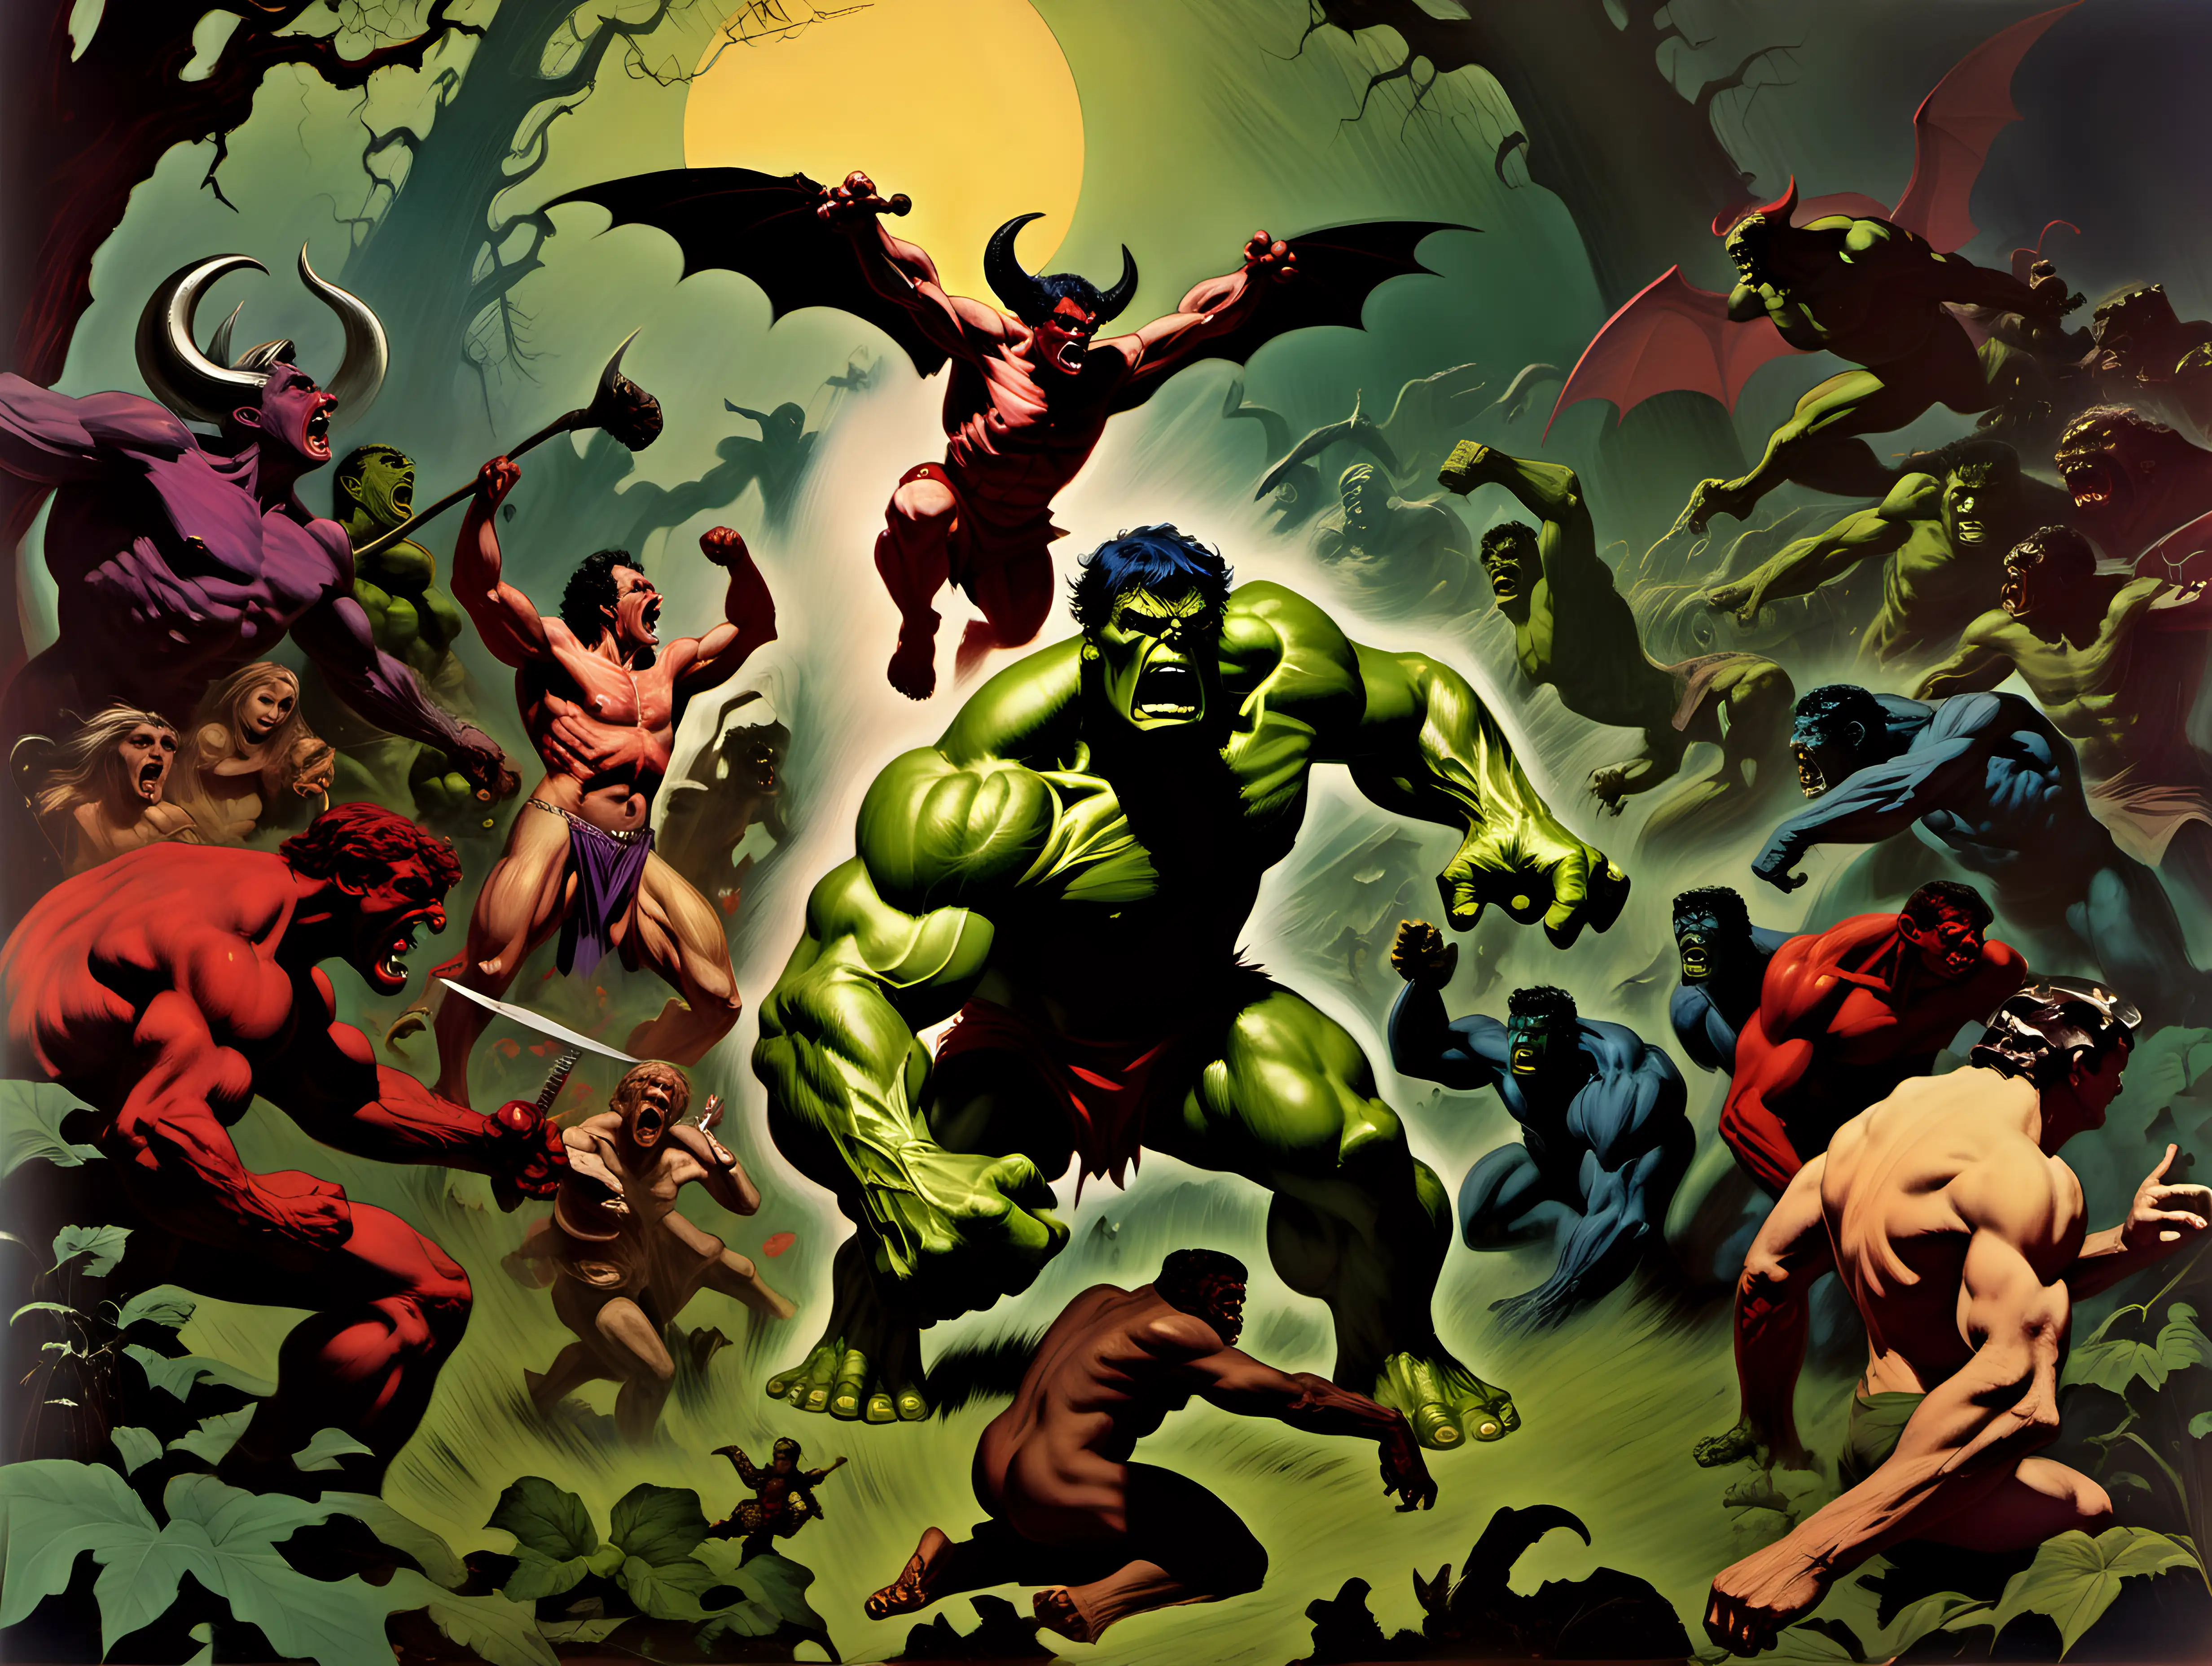 Satan fighting The Hulk in the Garden of Eden surrounded by demons in color in the style of Frank Frazetta